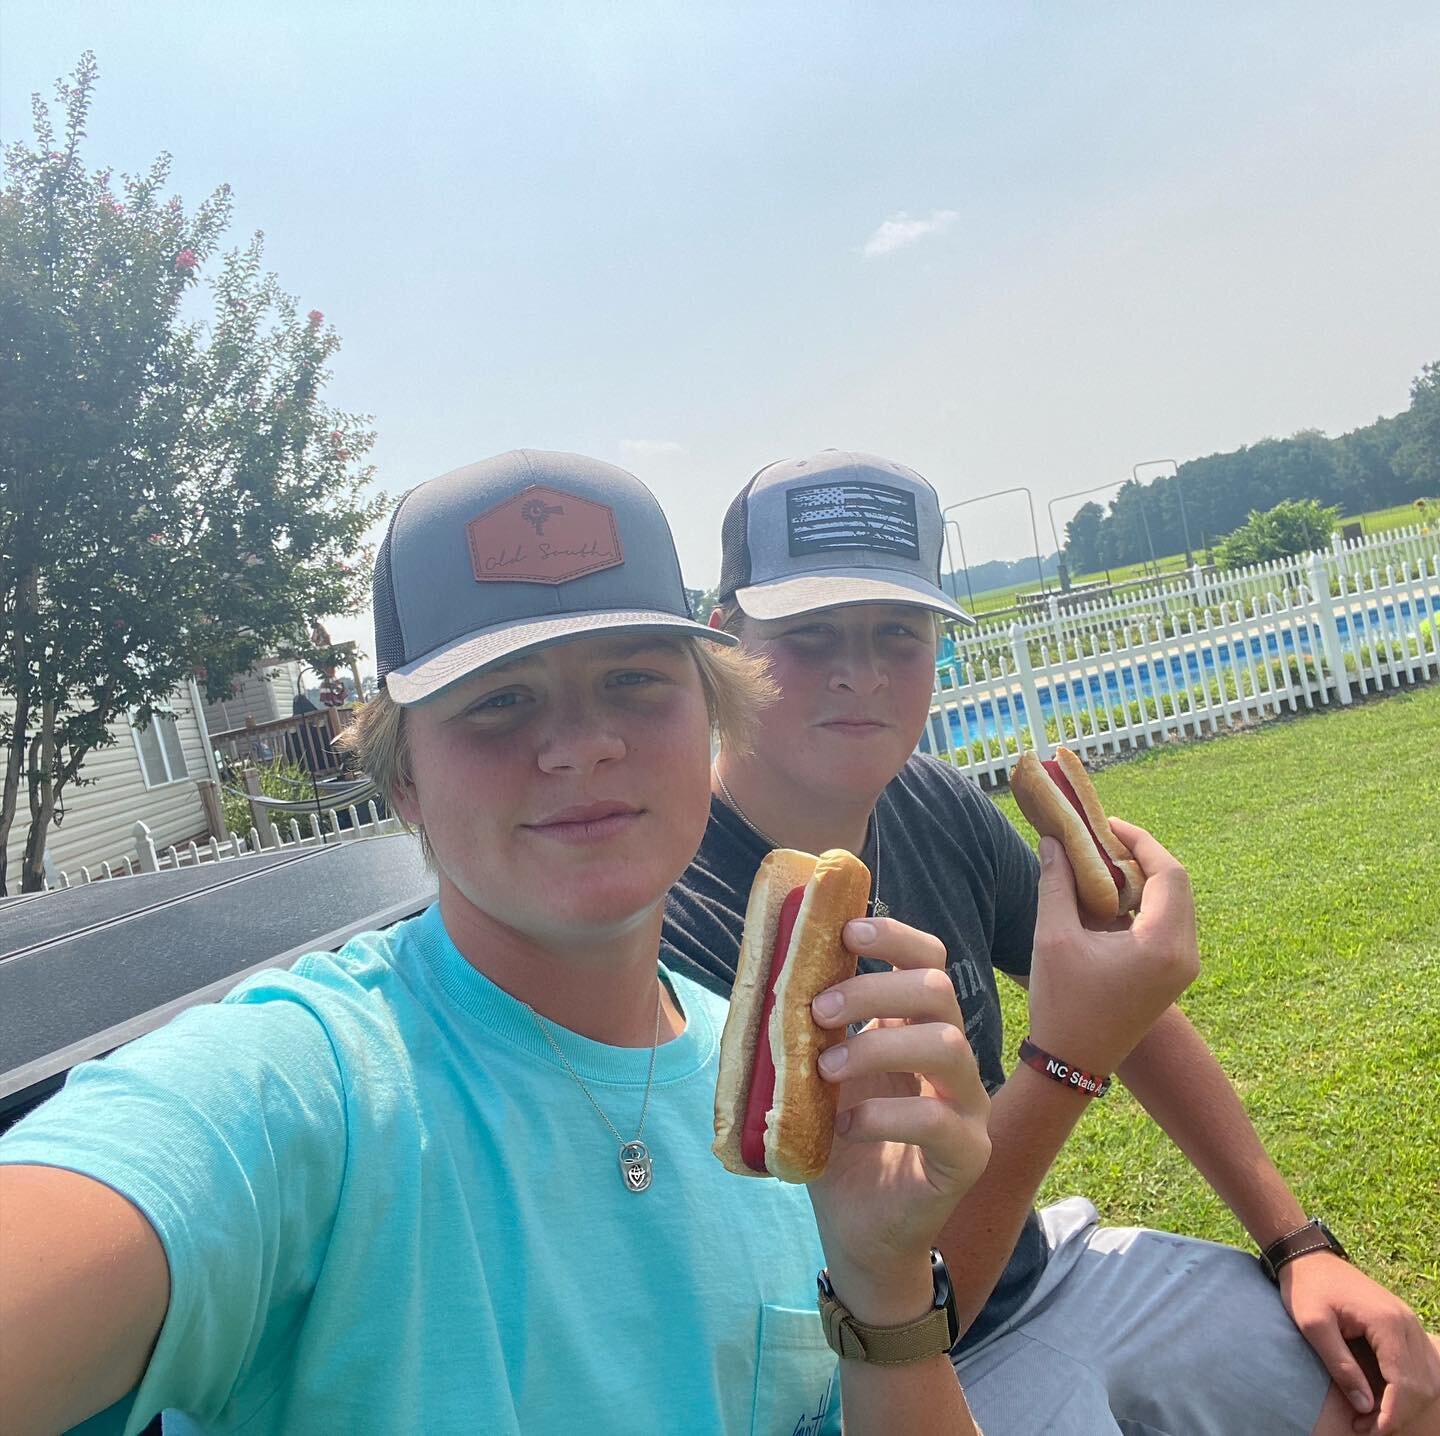 You know what&rsquo;s fun? Running down to the local Friendly Mart store to get some Bright Leaf hot dogs and eating them on the tailgate. Talk about awesome!!
📸 Gideon Linton
#awesomeouthere #enc #nationalhotdogday